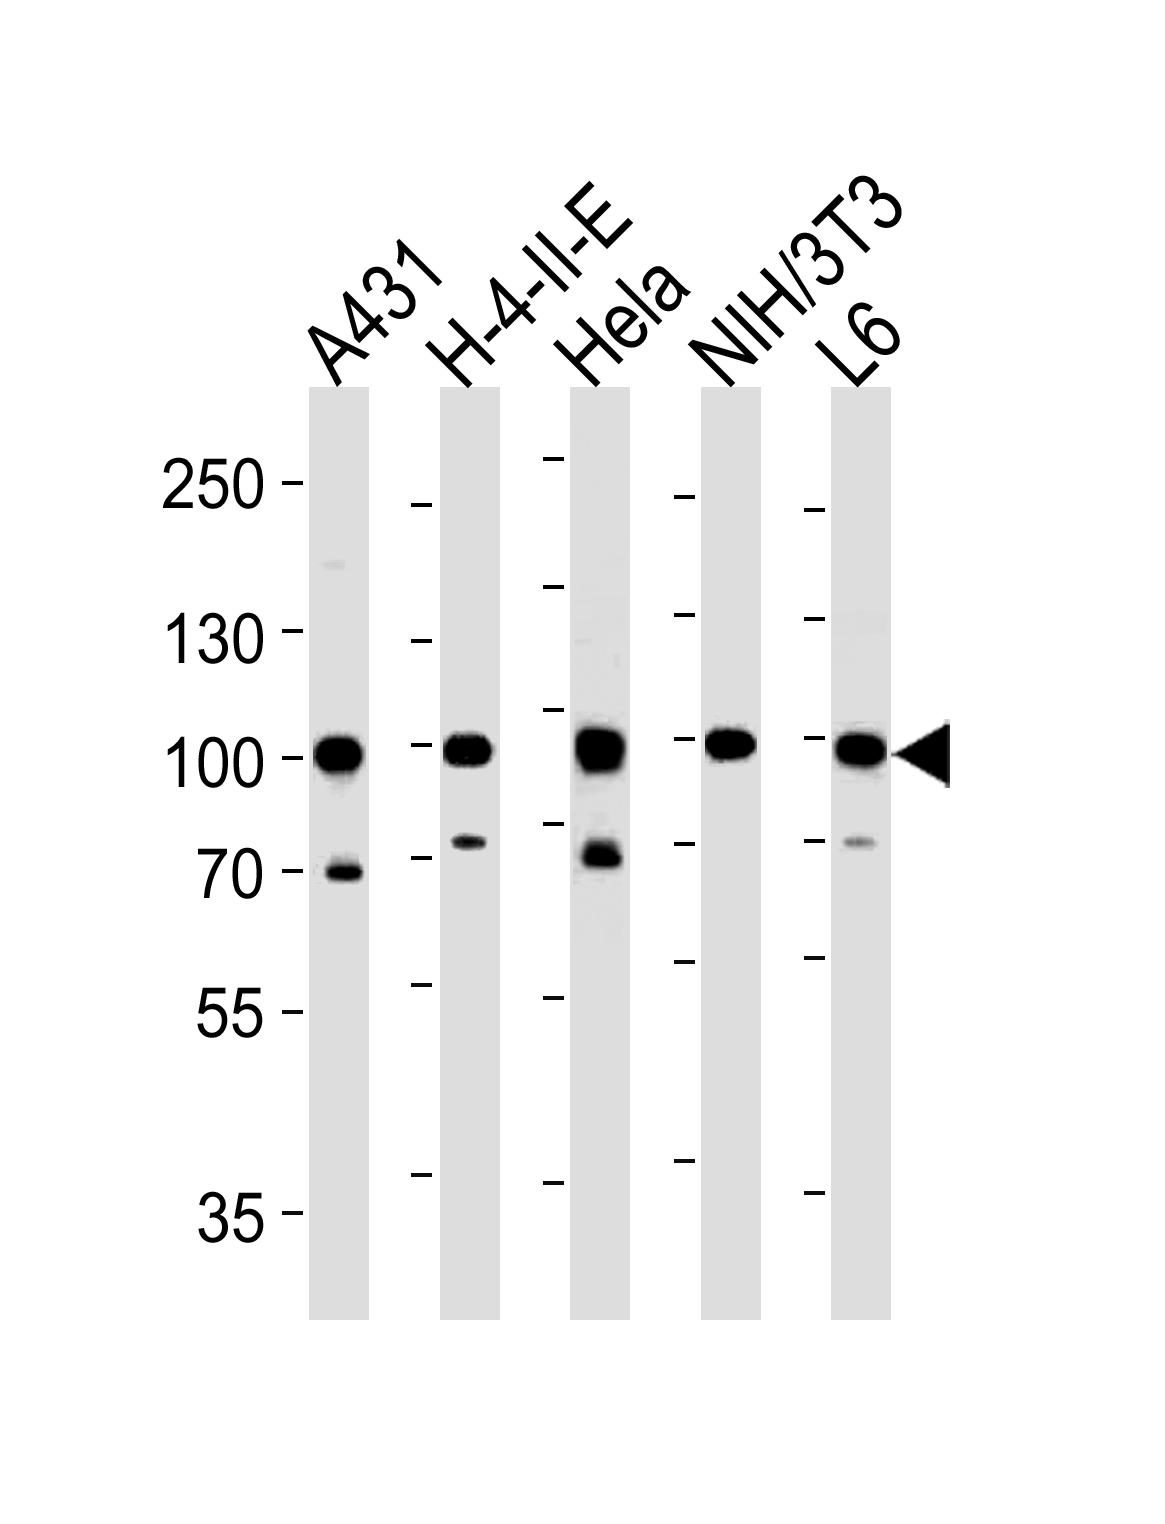 HSP90AB1 Antibody (C-term) (Cat.# AP7867b) western blot analysis in A431,H-4-II-E,Hela,mouse NIH/3T3,rat L6 cell line lysates (35ug/lane).This demonstrates the HSP90AB1 antibody detected the HSP90AB1 protein (arrow).